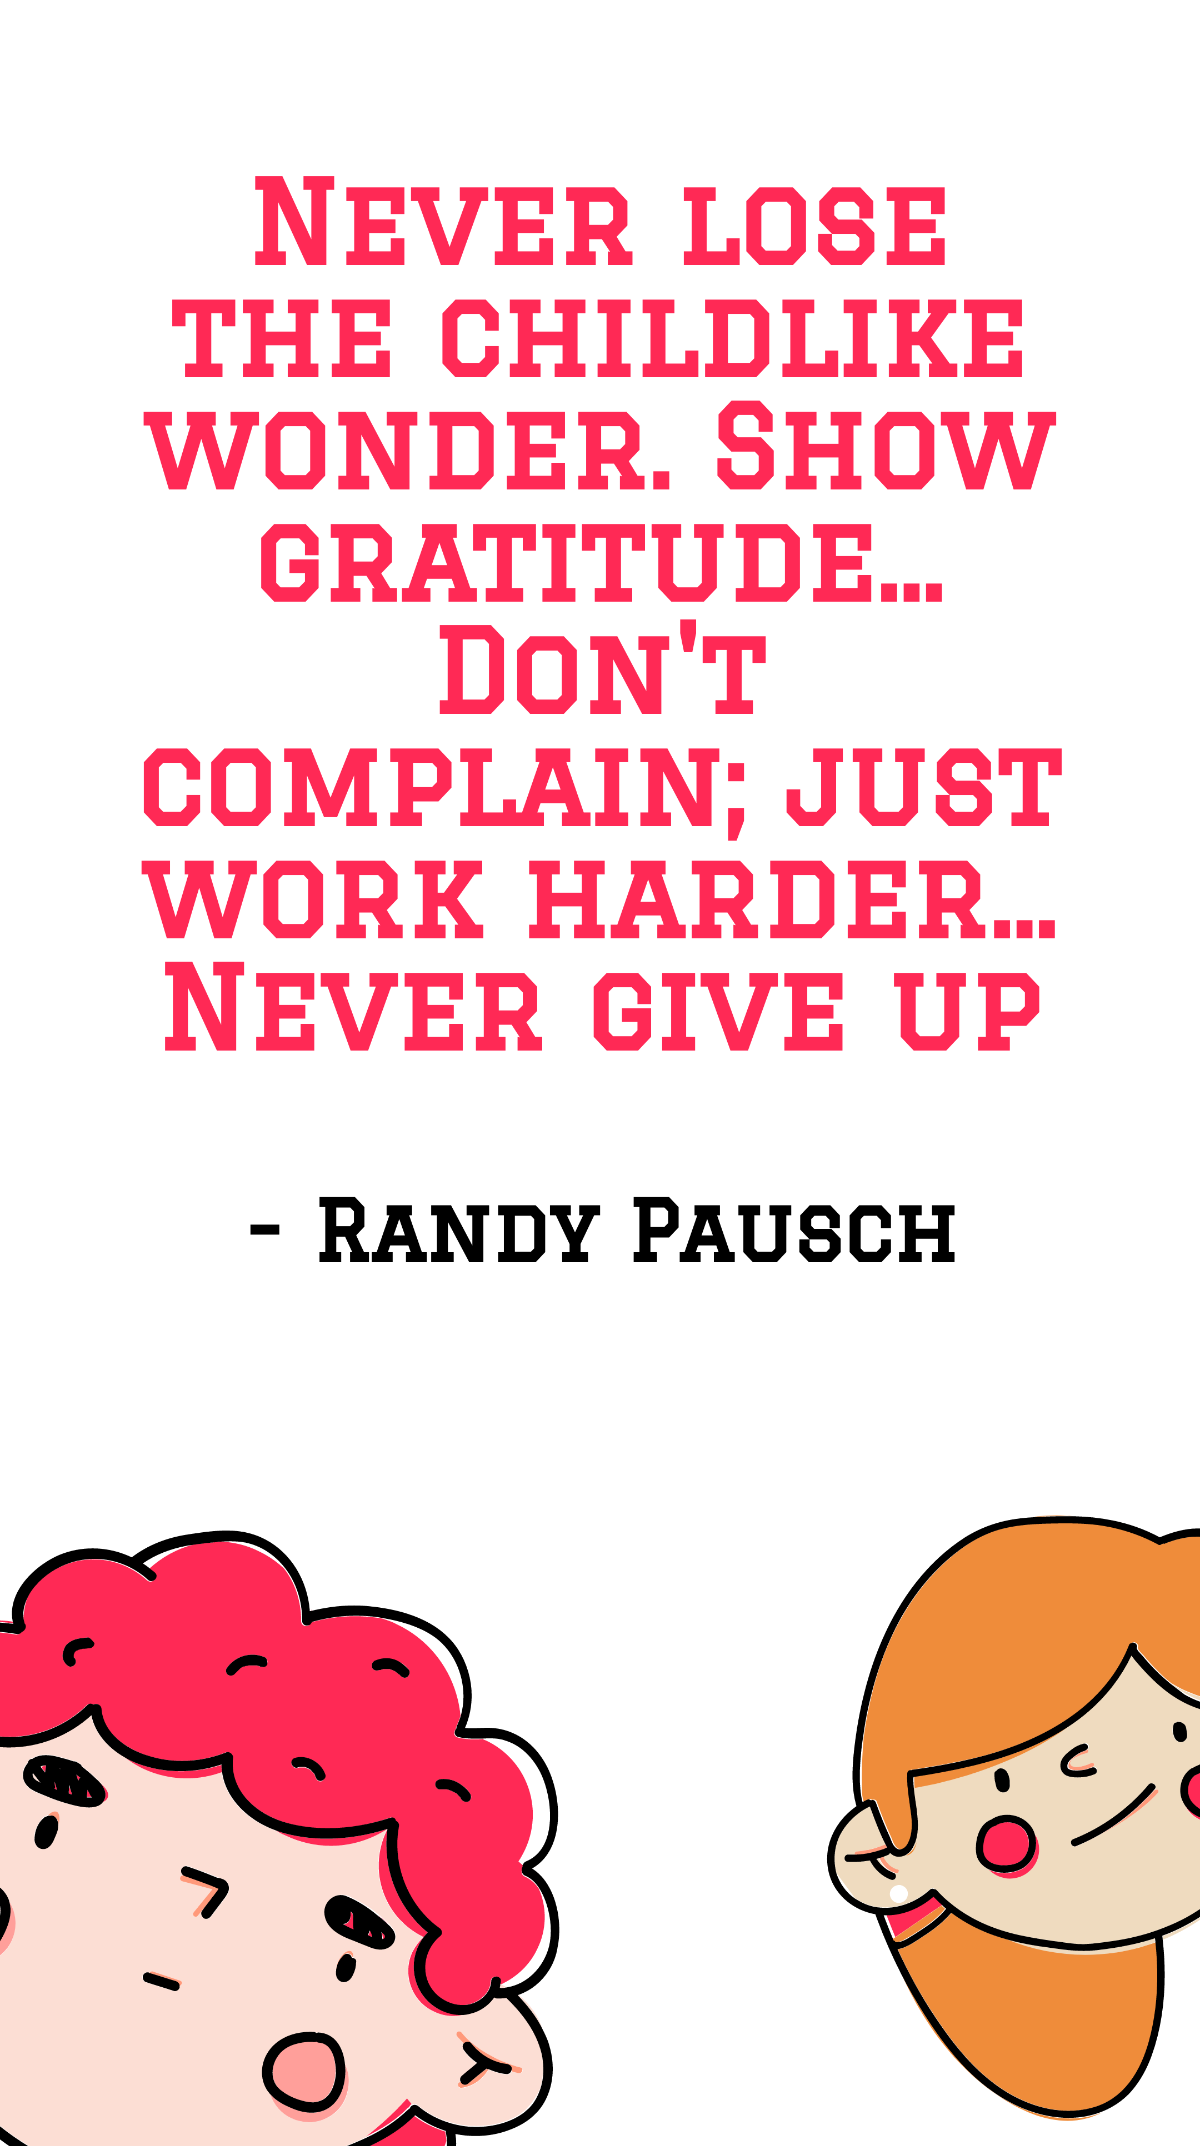 Randy Pausch - Never lose the childlike wonder. Show gratitude... Don't complain; just work harder... Never give up